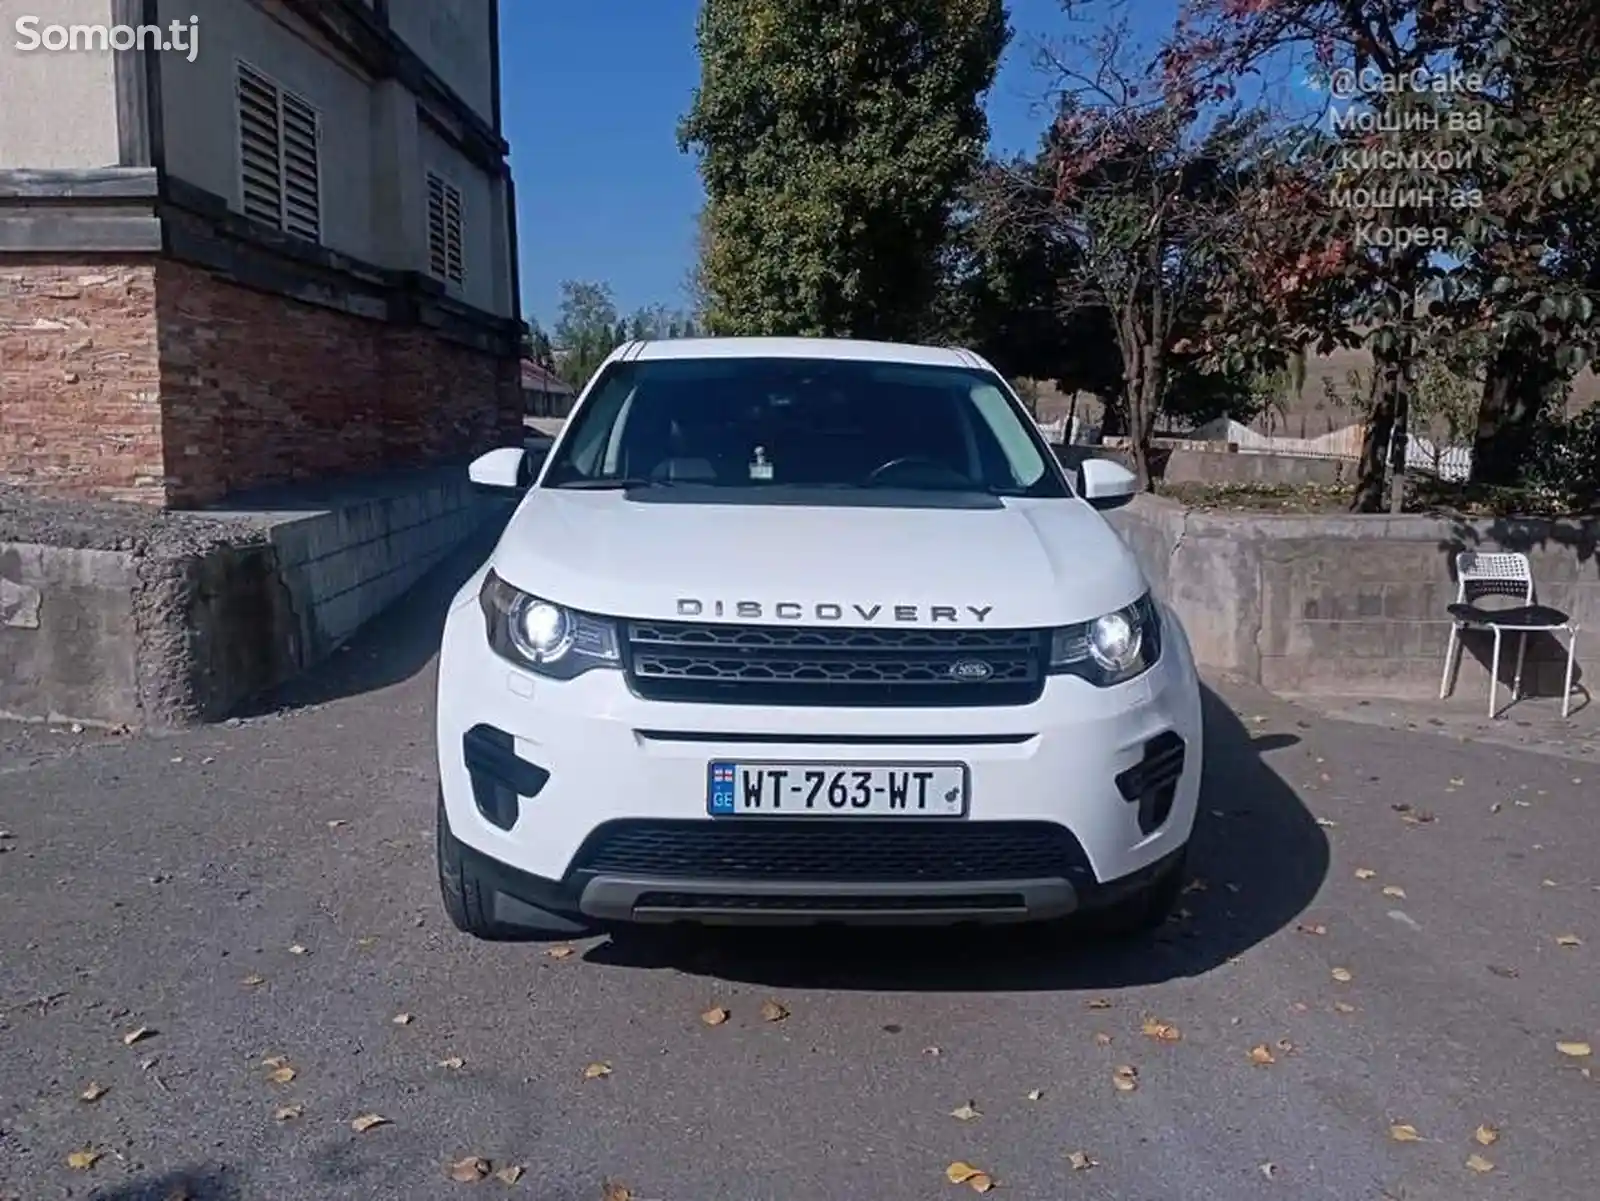 Land Rover Discovery, 2016-15